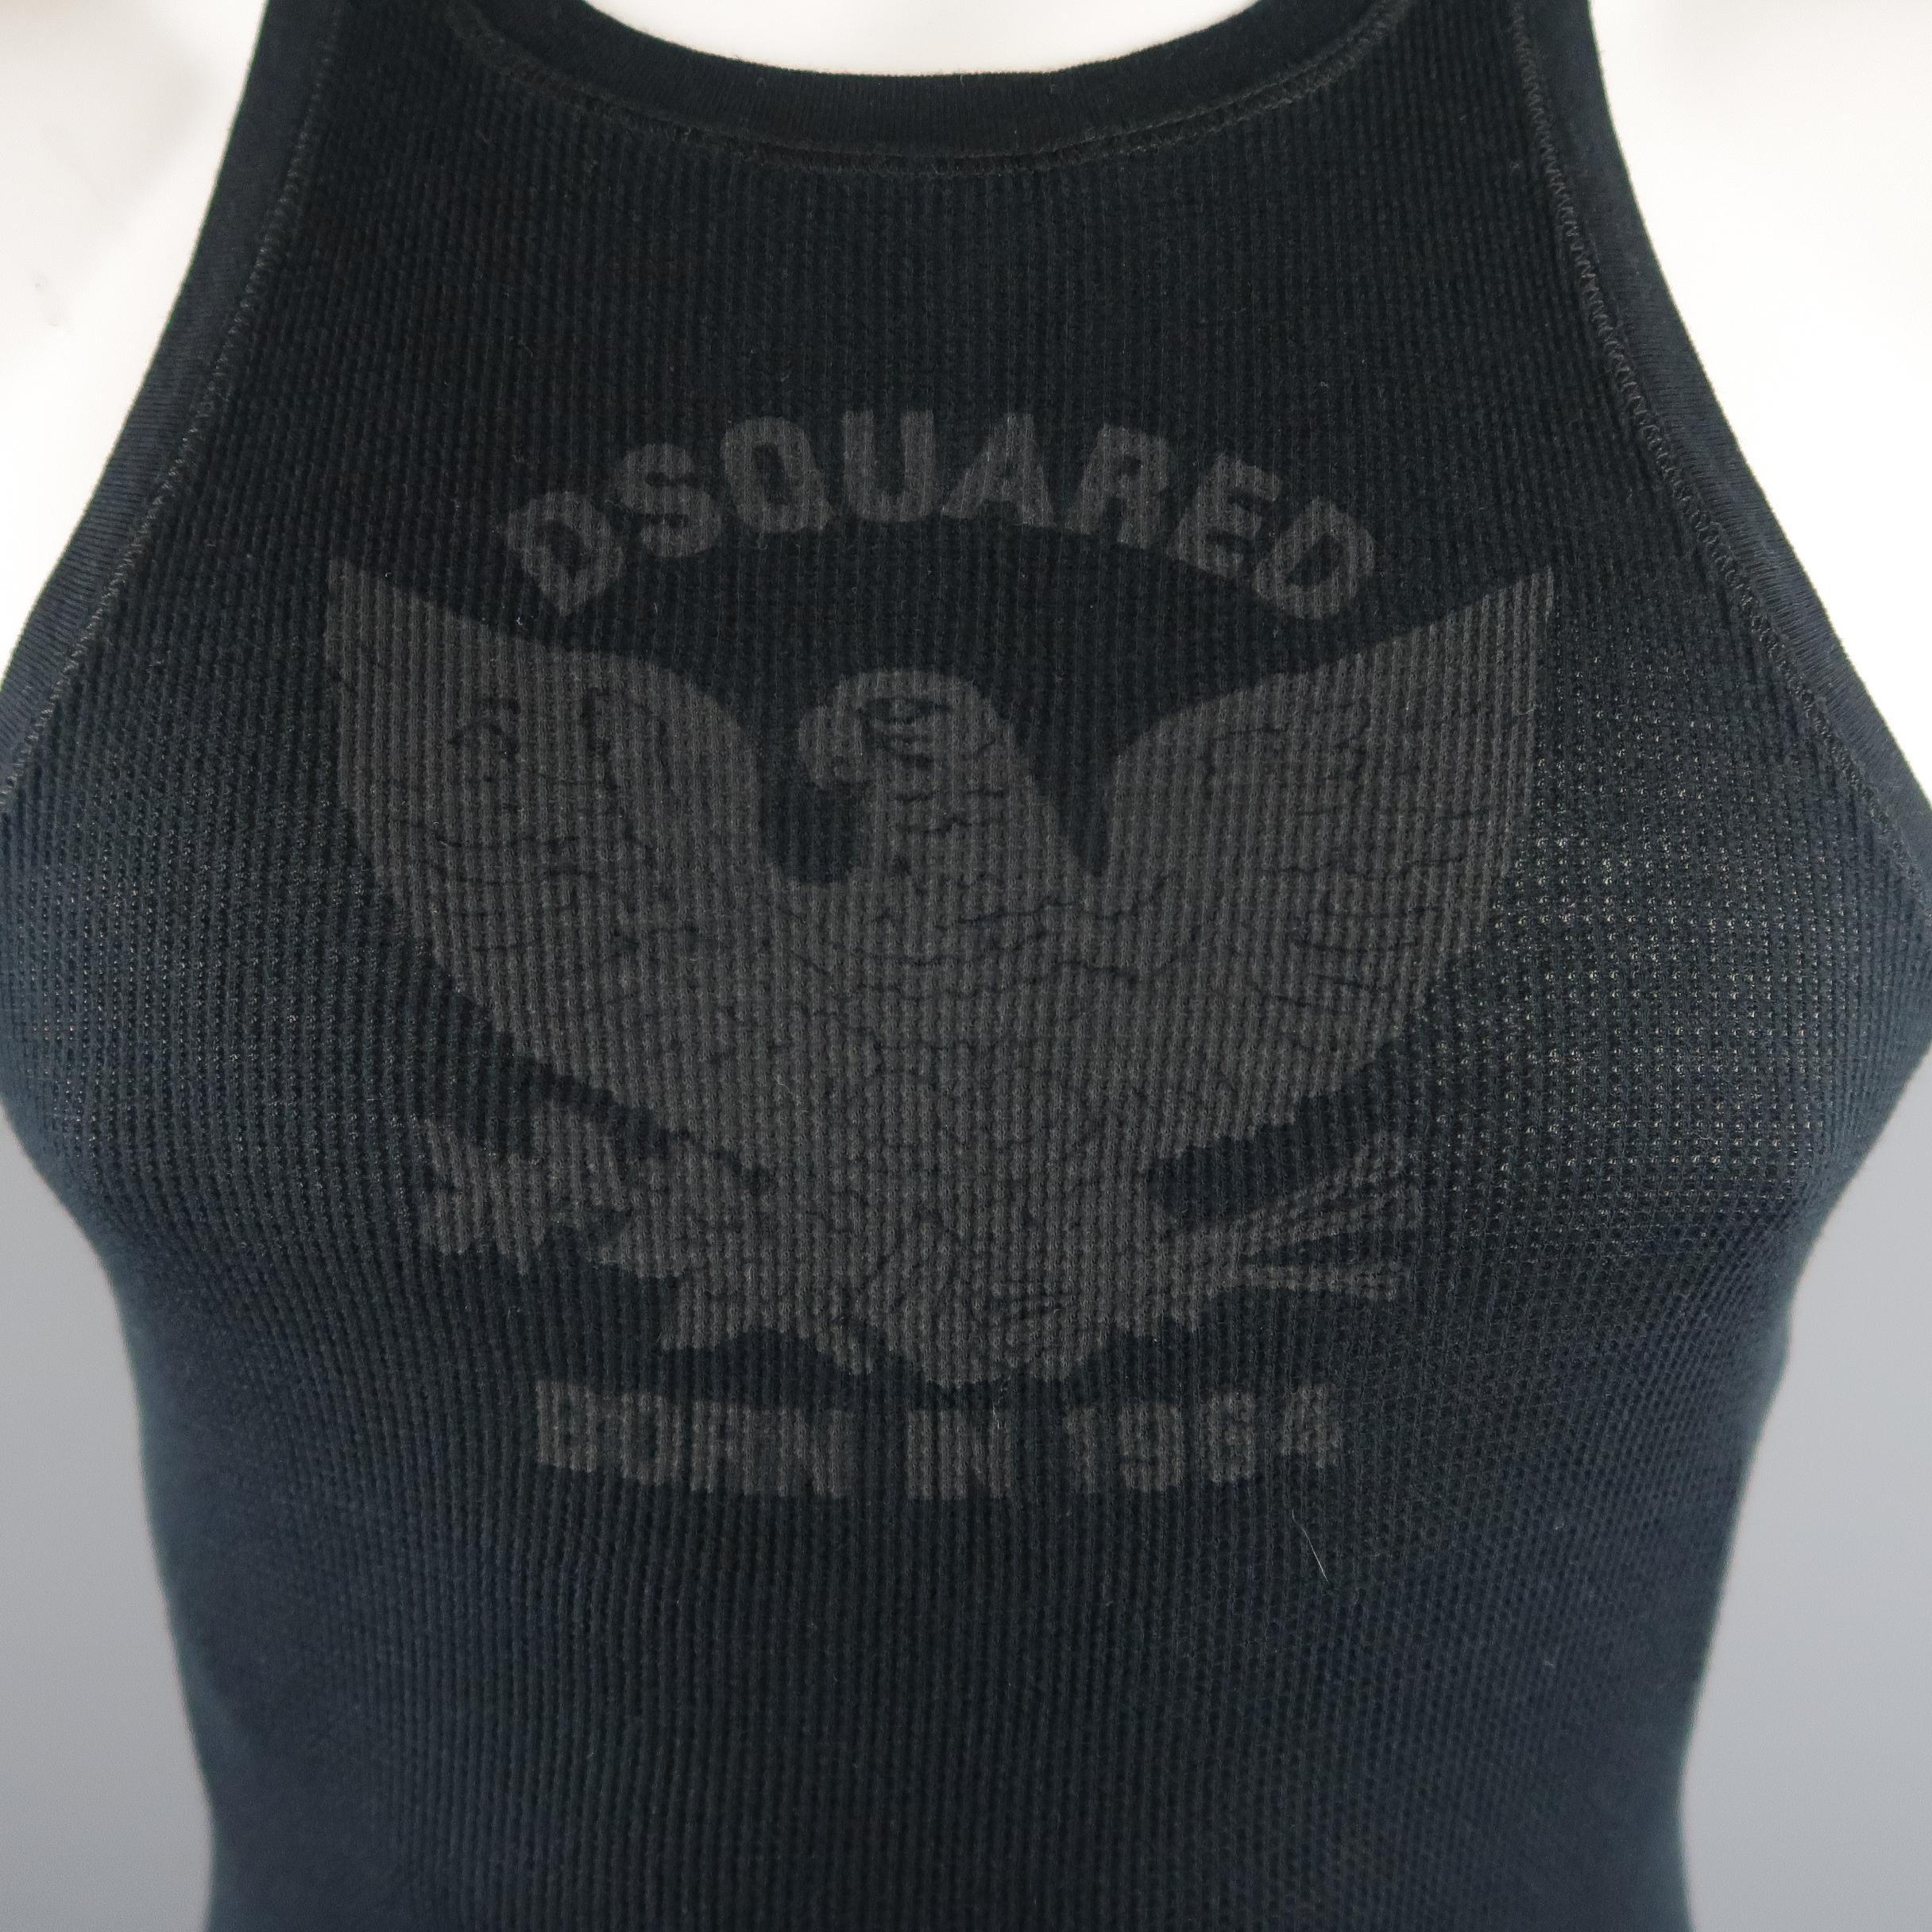 DSQUARED2 tank top come in black solid cotton material, with a 